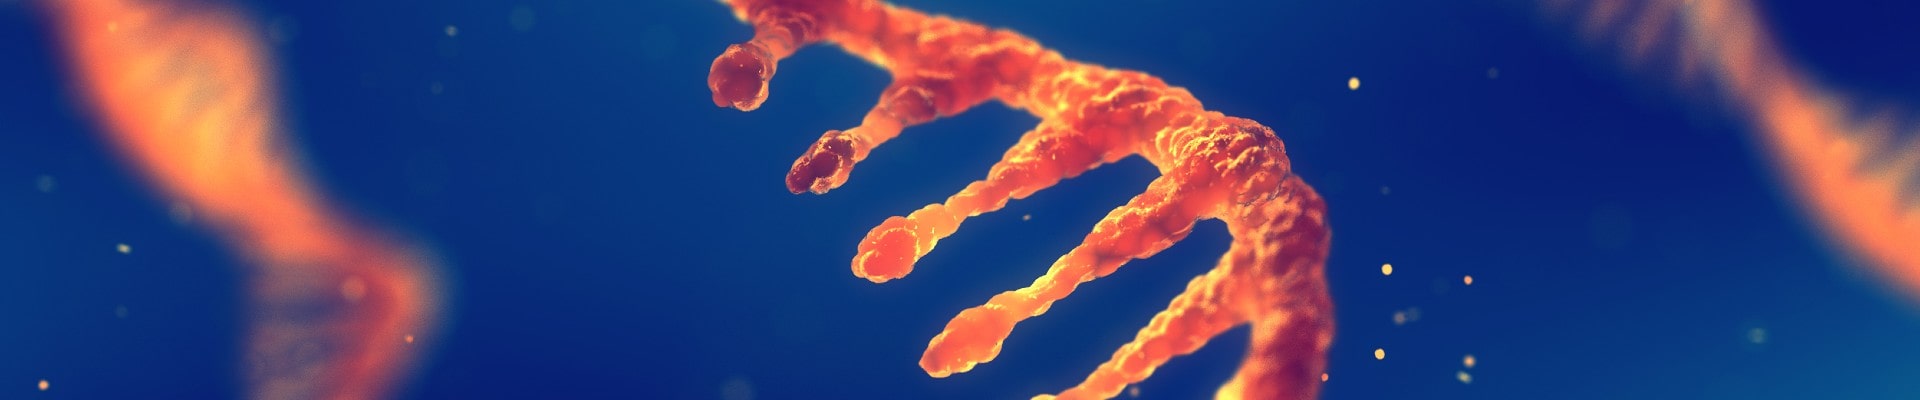 An image of RNA